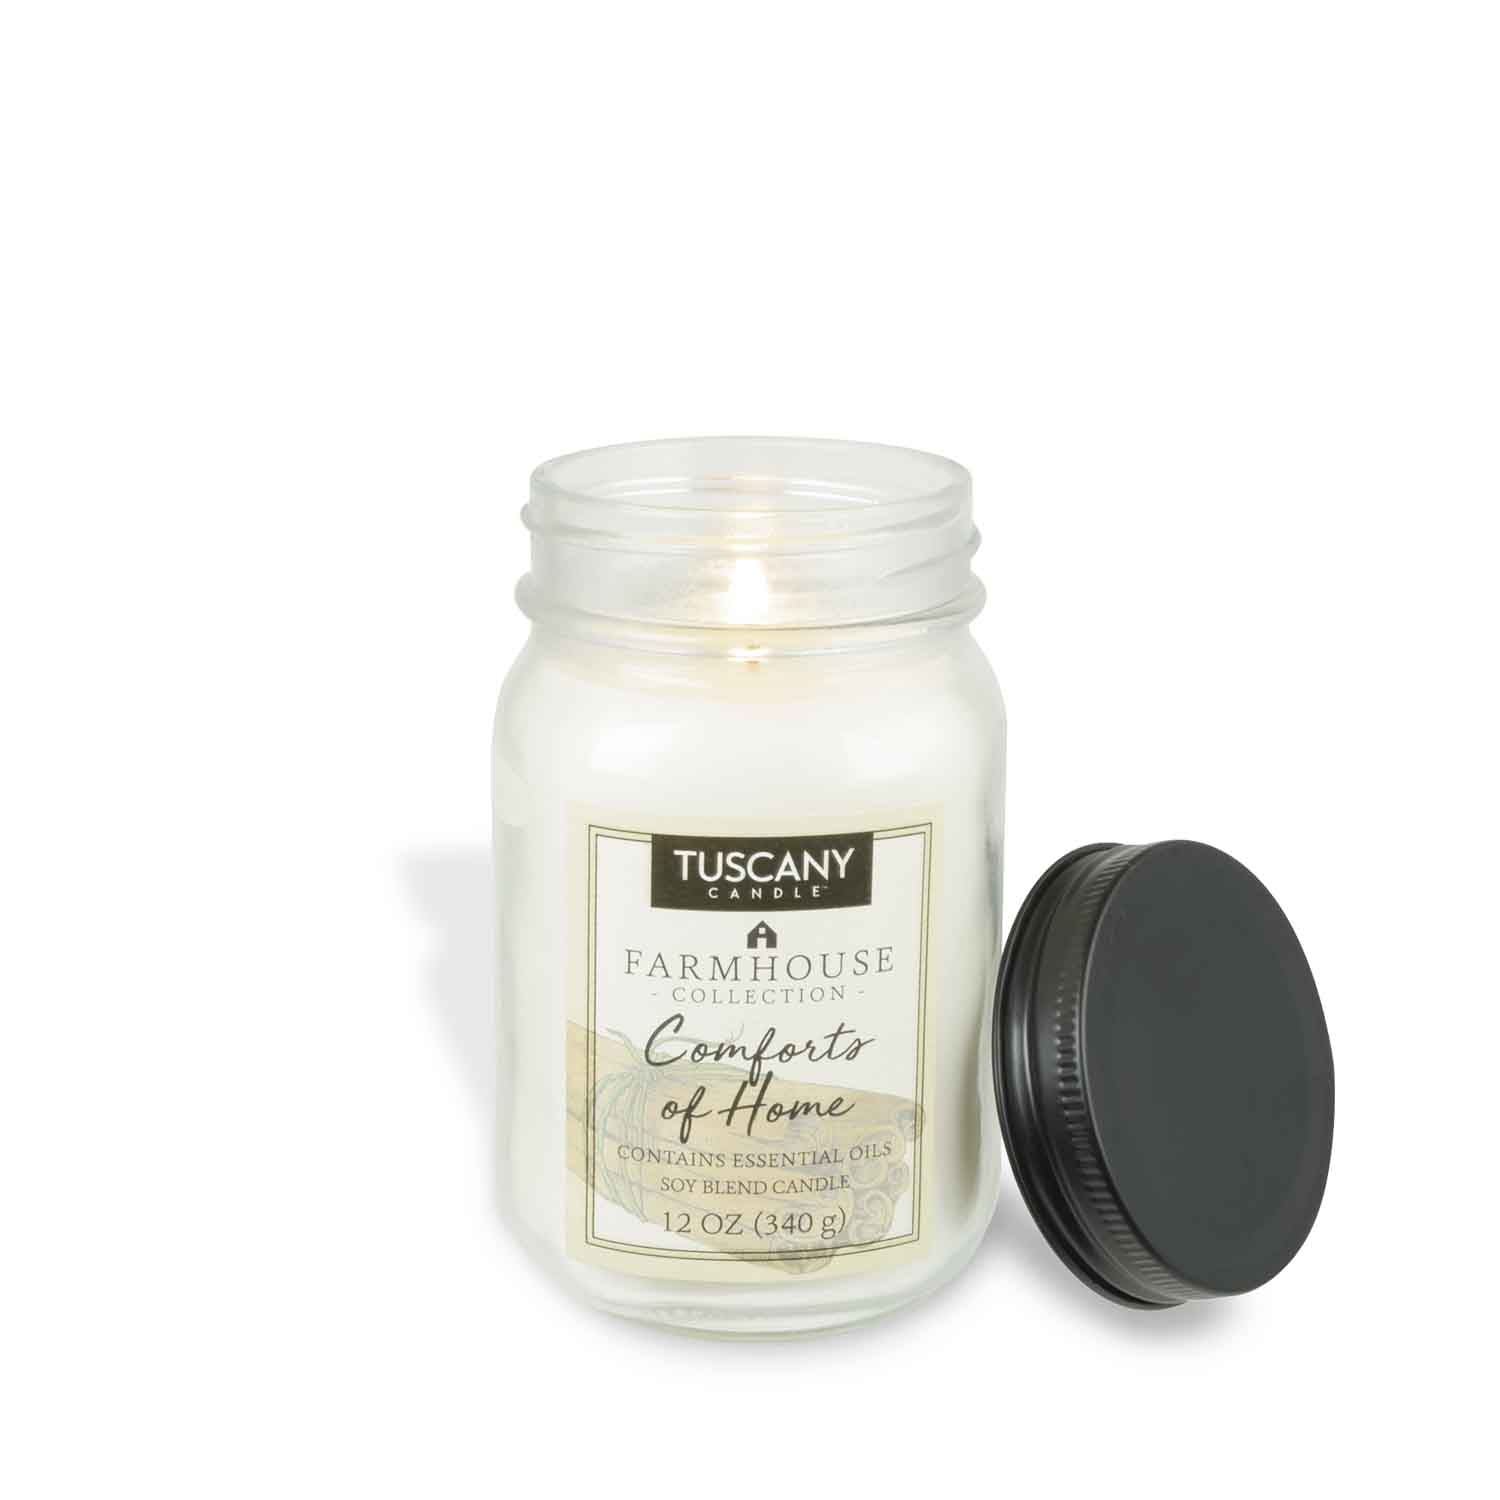 A white jar with a black lid containing Comforts of Home Scented Jar Candle (12 oz) – Farmhouse Collection by Tuscany Candle® EVD containing nutmeg.